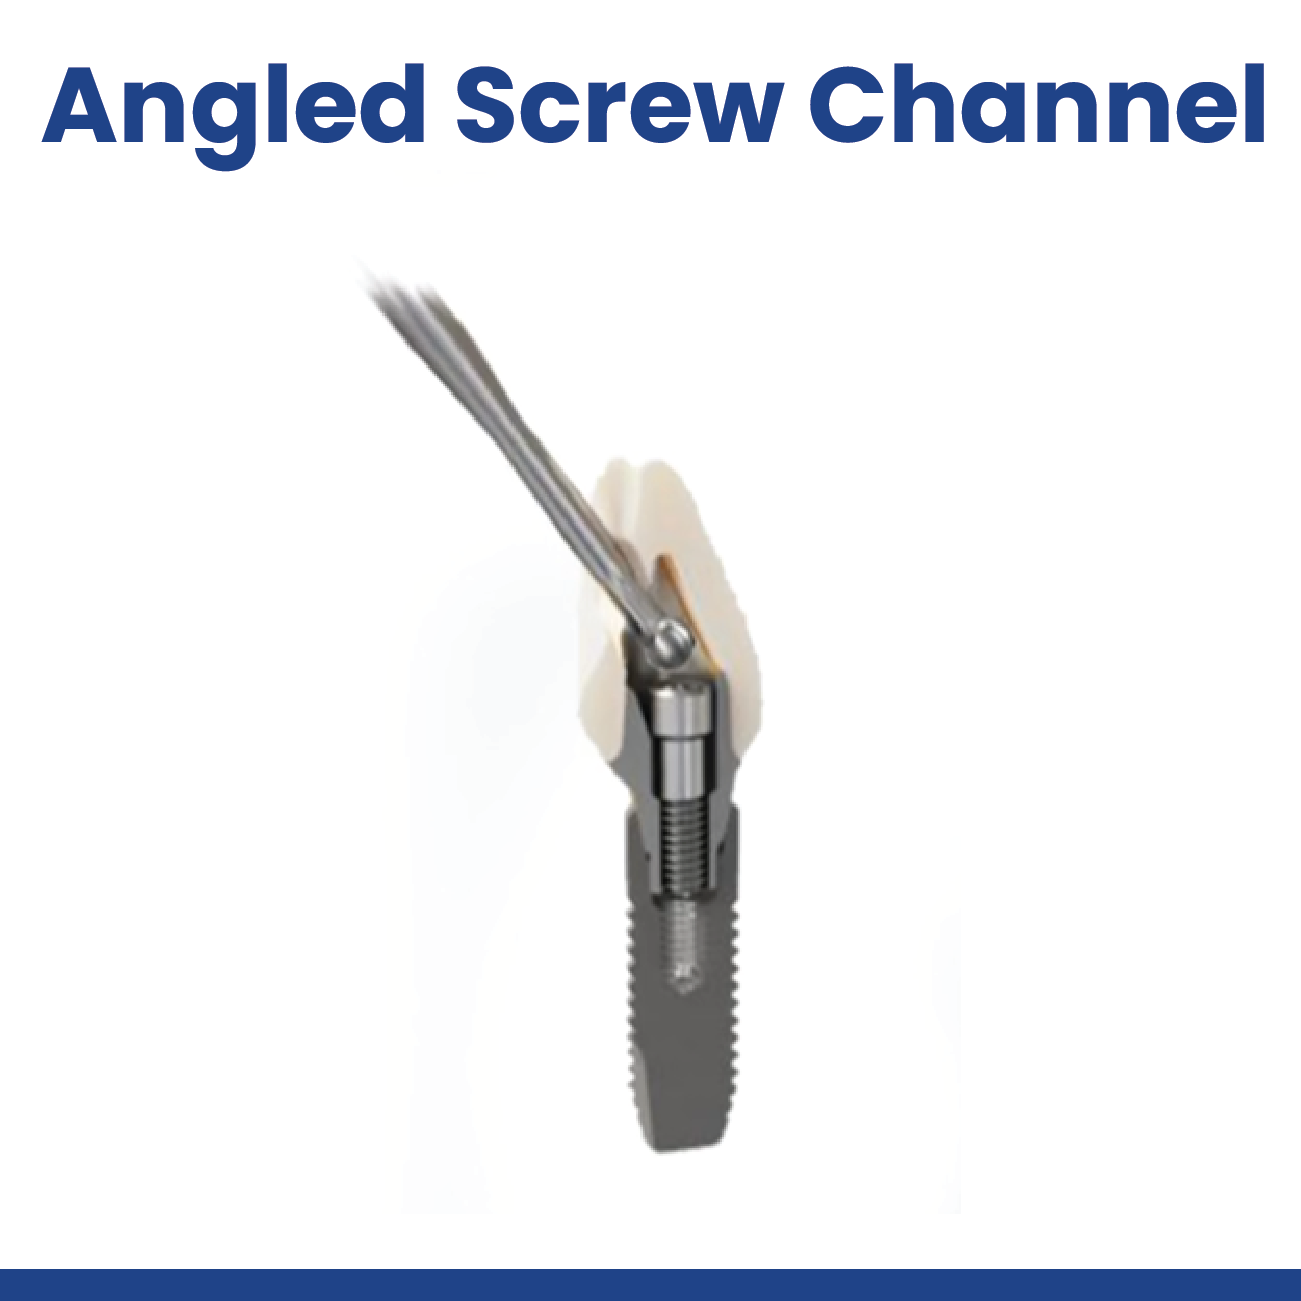 Angled Screw Channel